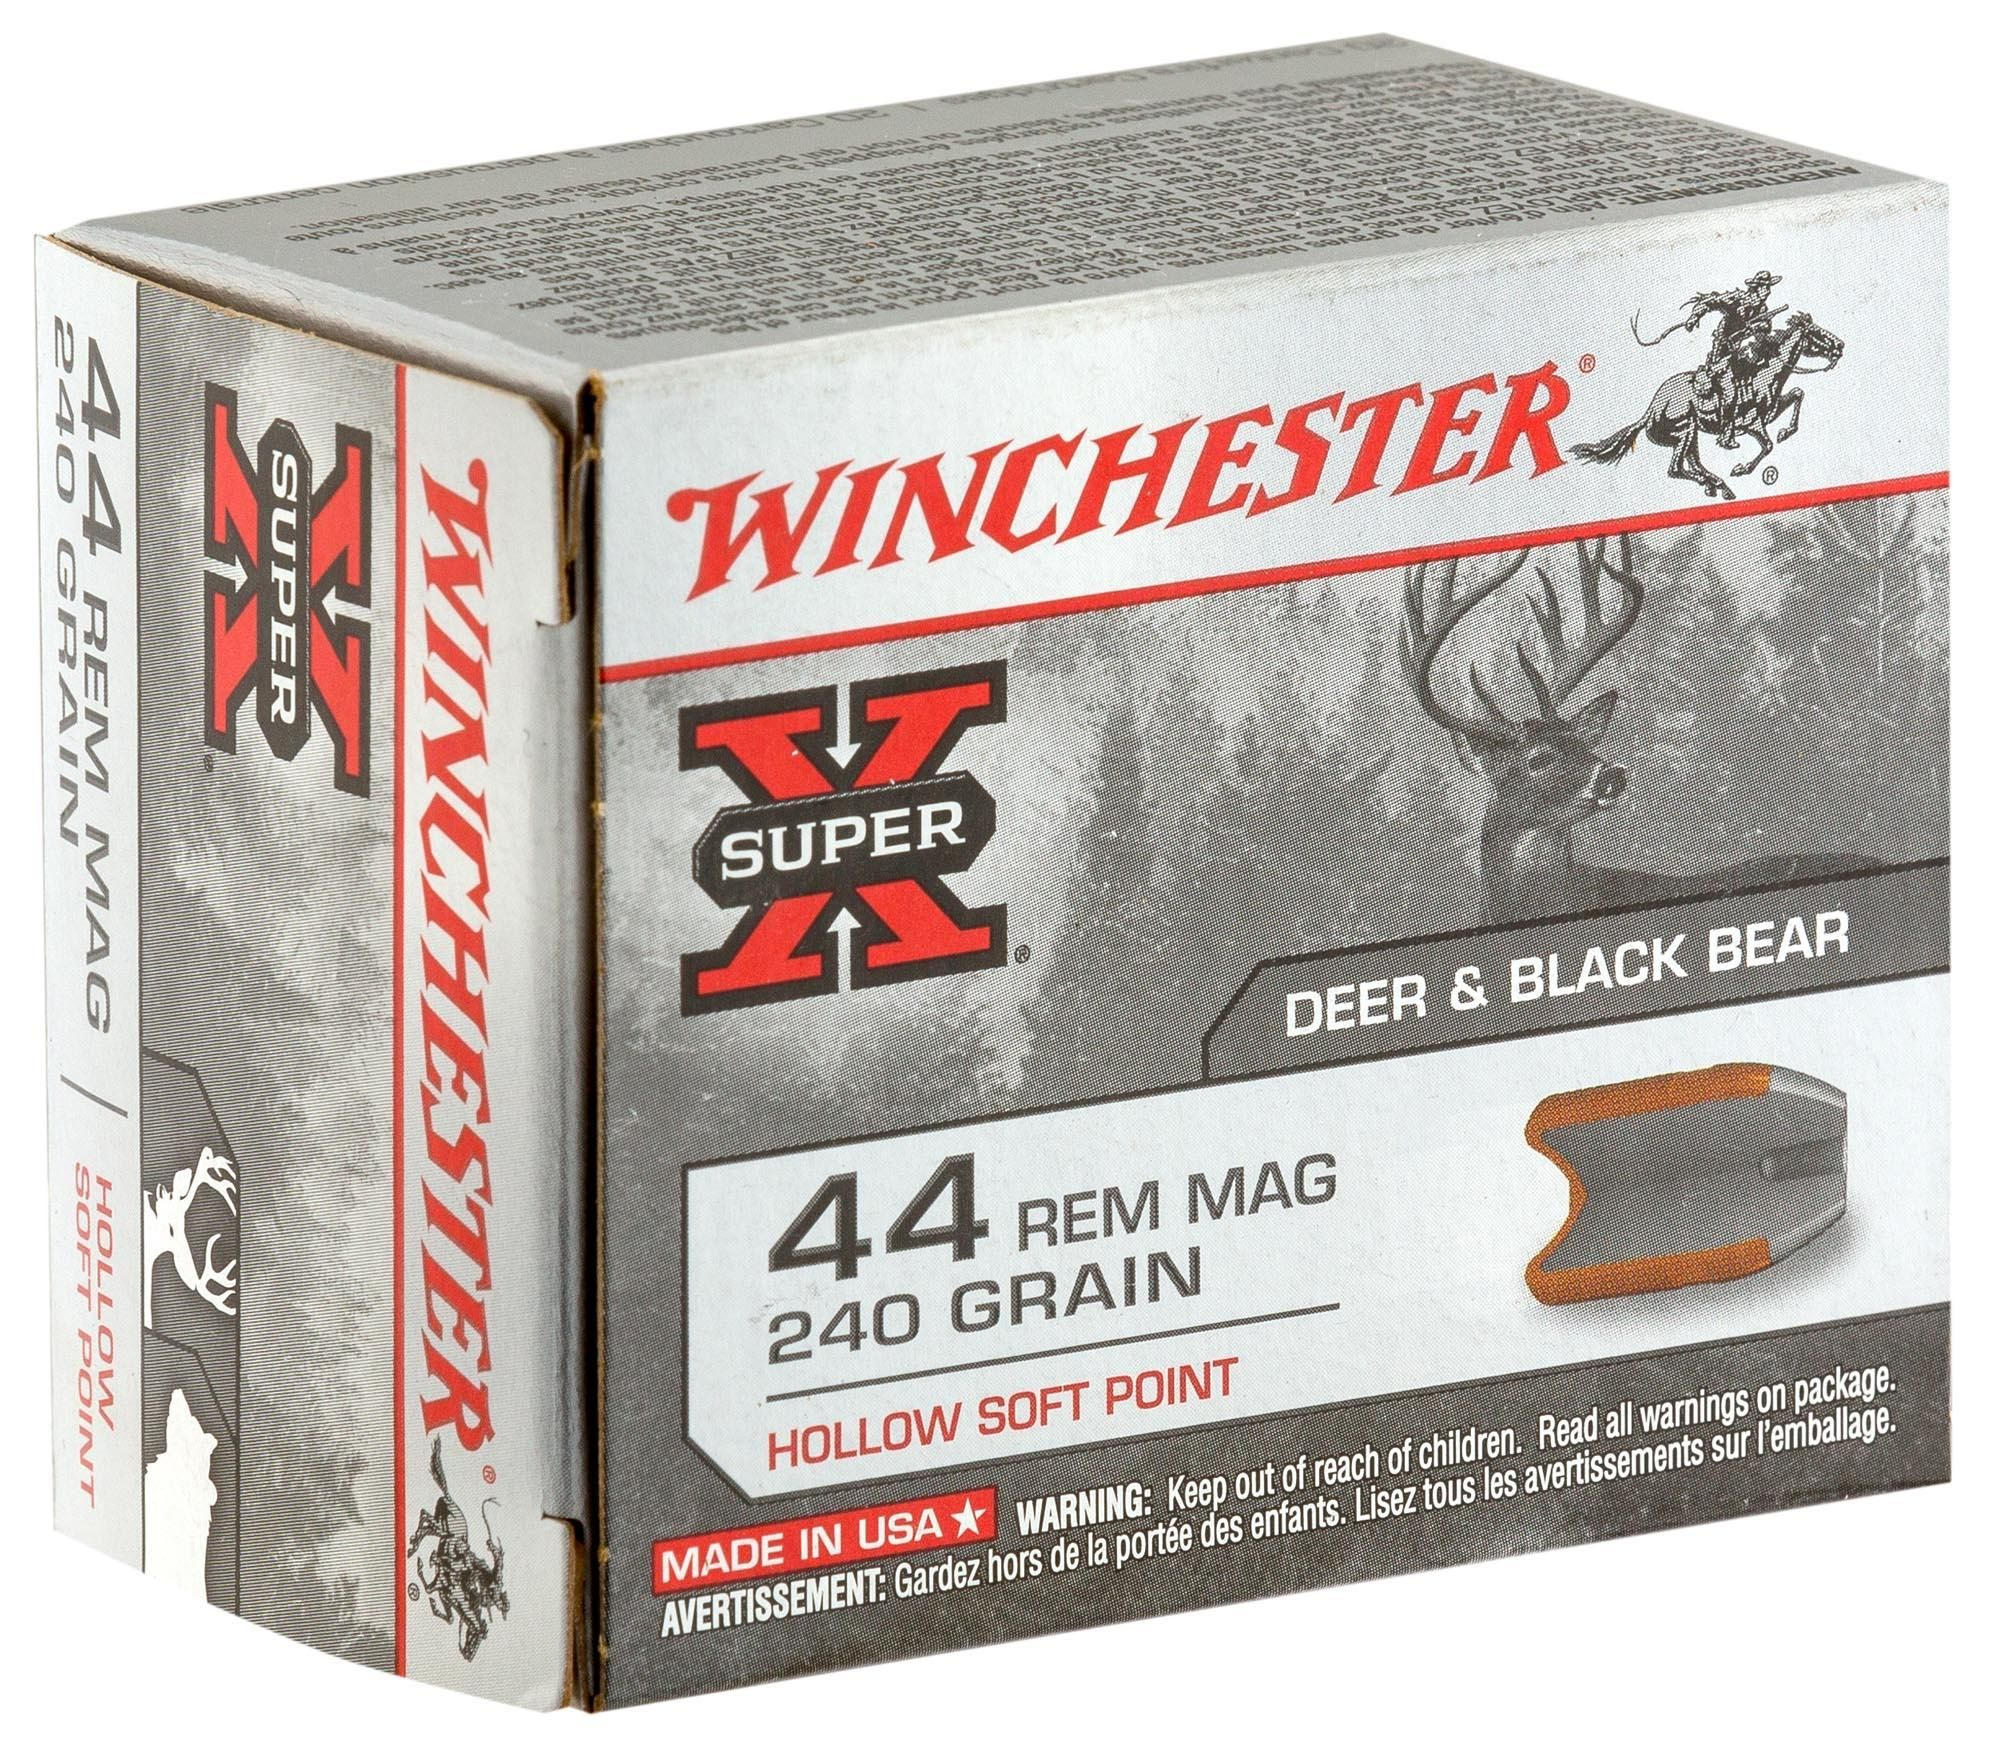 WINCHESTER CAL.44 REM MAG